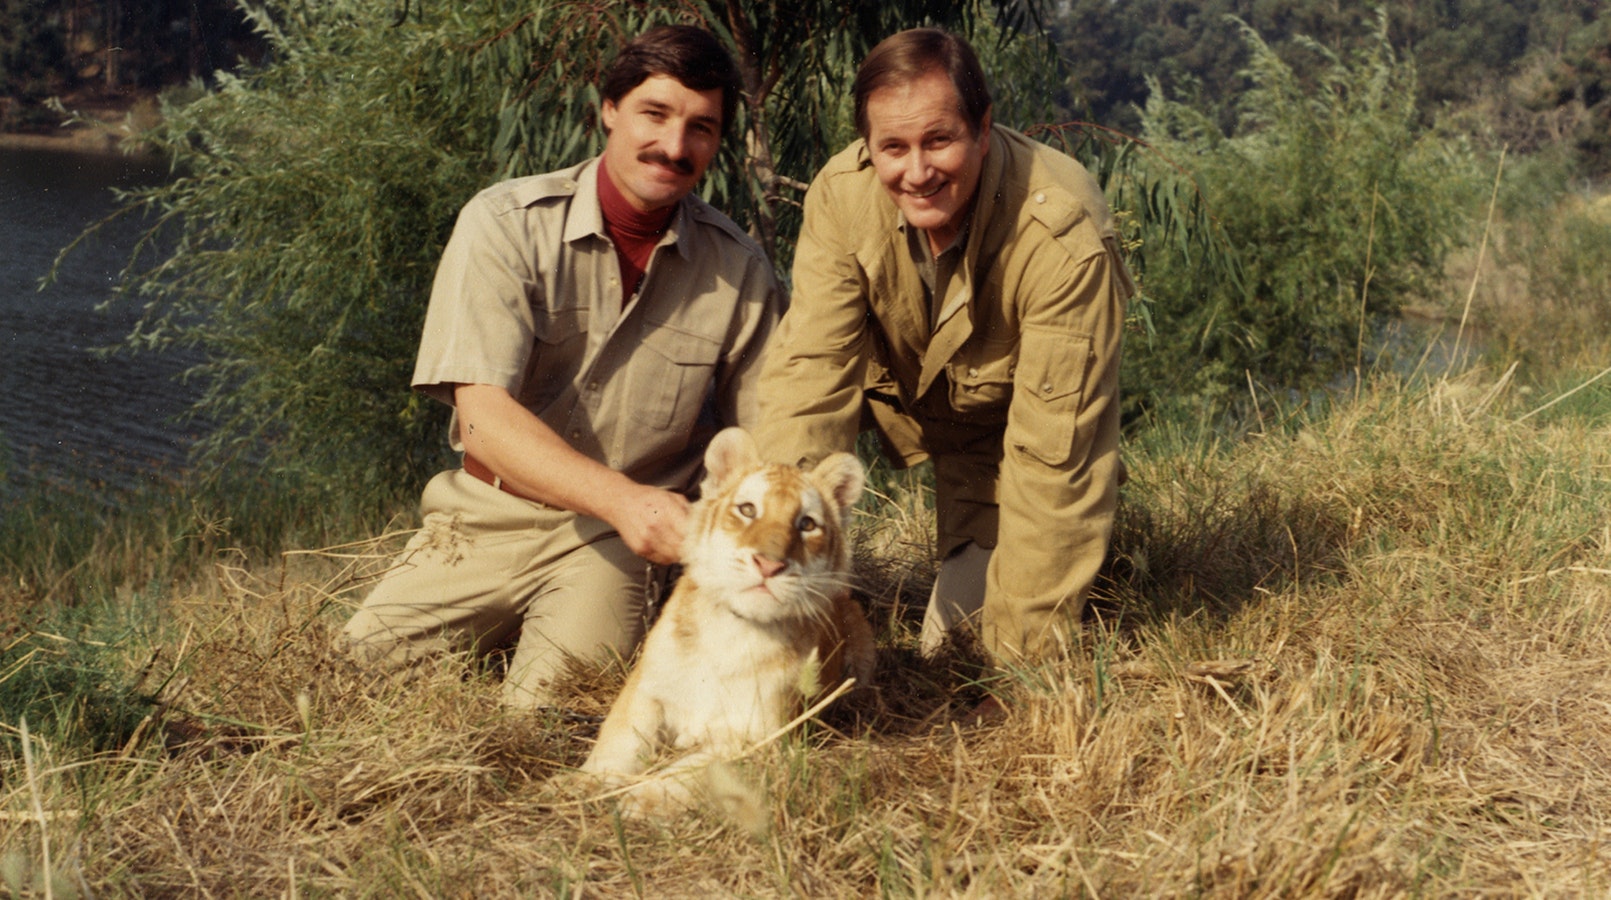 Peter Gros, left, hosts the “Mutual of Omaha’s Wild Kingdom” nature documentary series, now in its 60th year. He follows in the footsteps of legendary hosts Marlin Perkins and Jim Fowler, right.